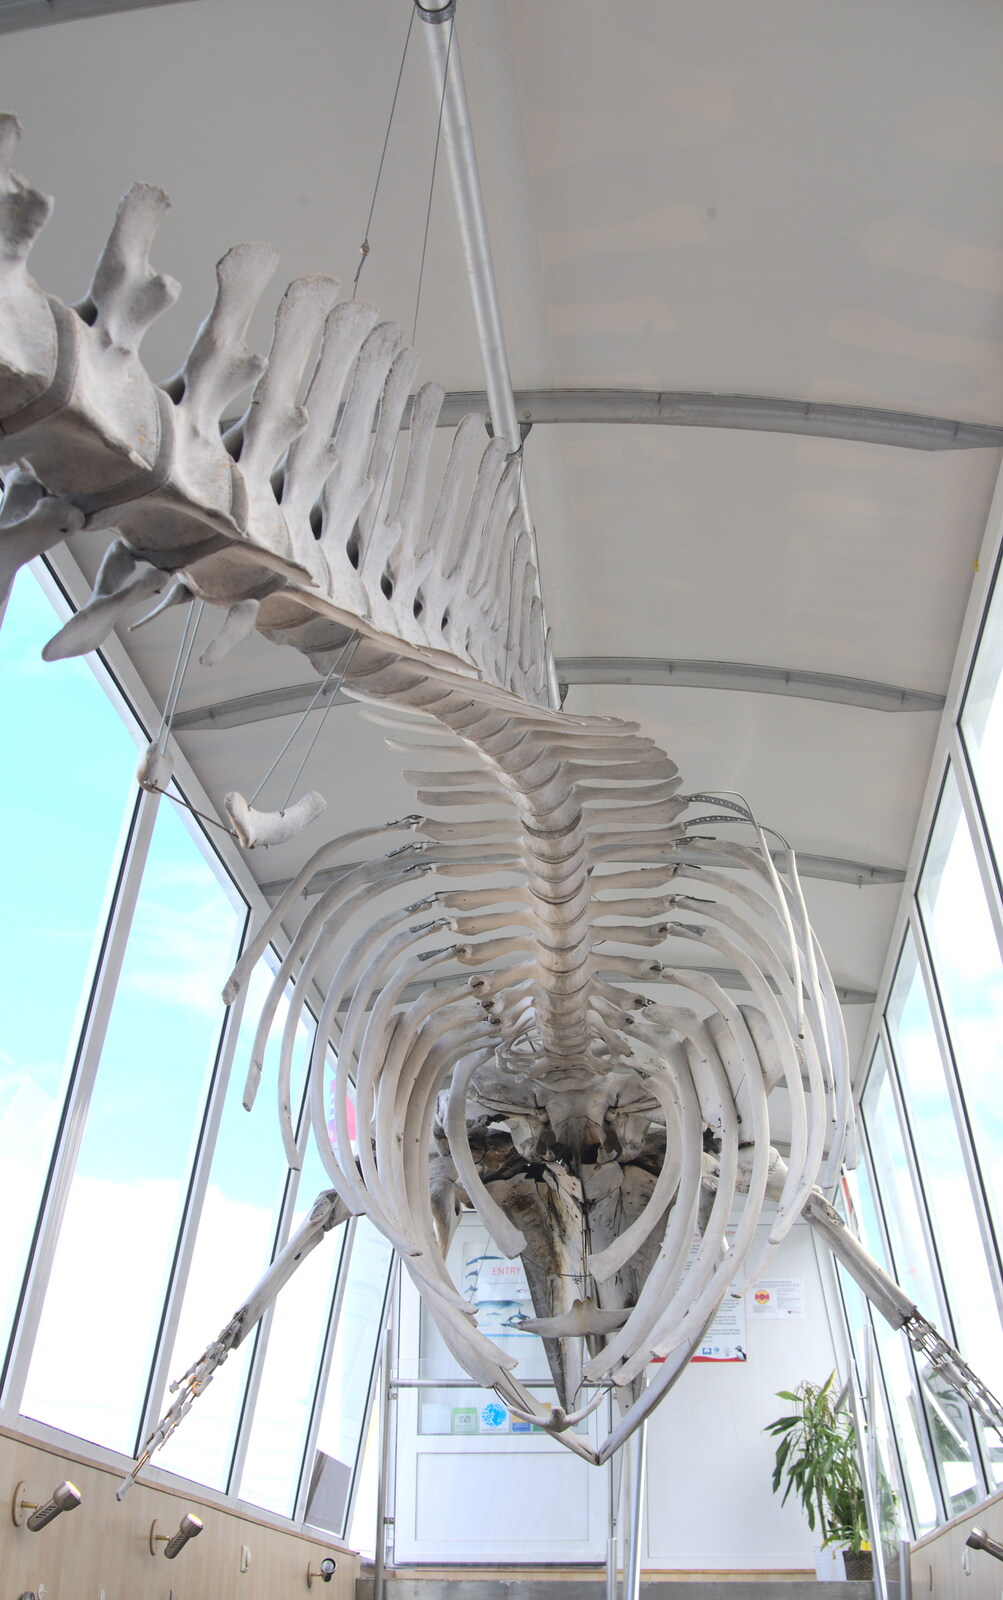 A whale skeleton from Hallgrímskirkja Cathedral and Whale Watching, Reykjavik - 21st April 2017